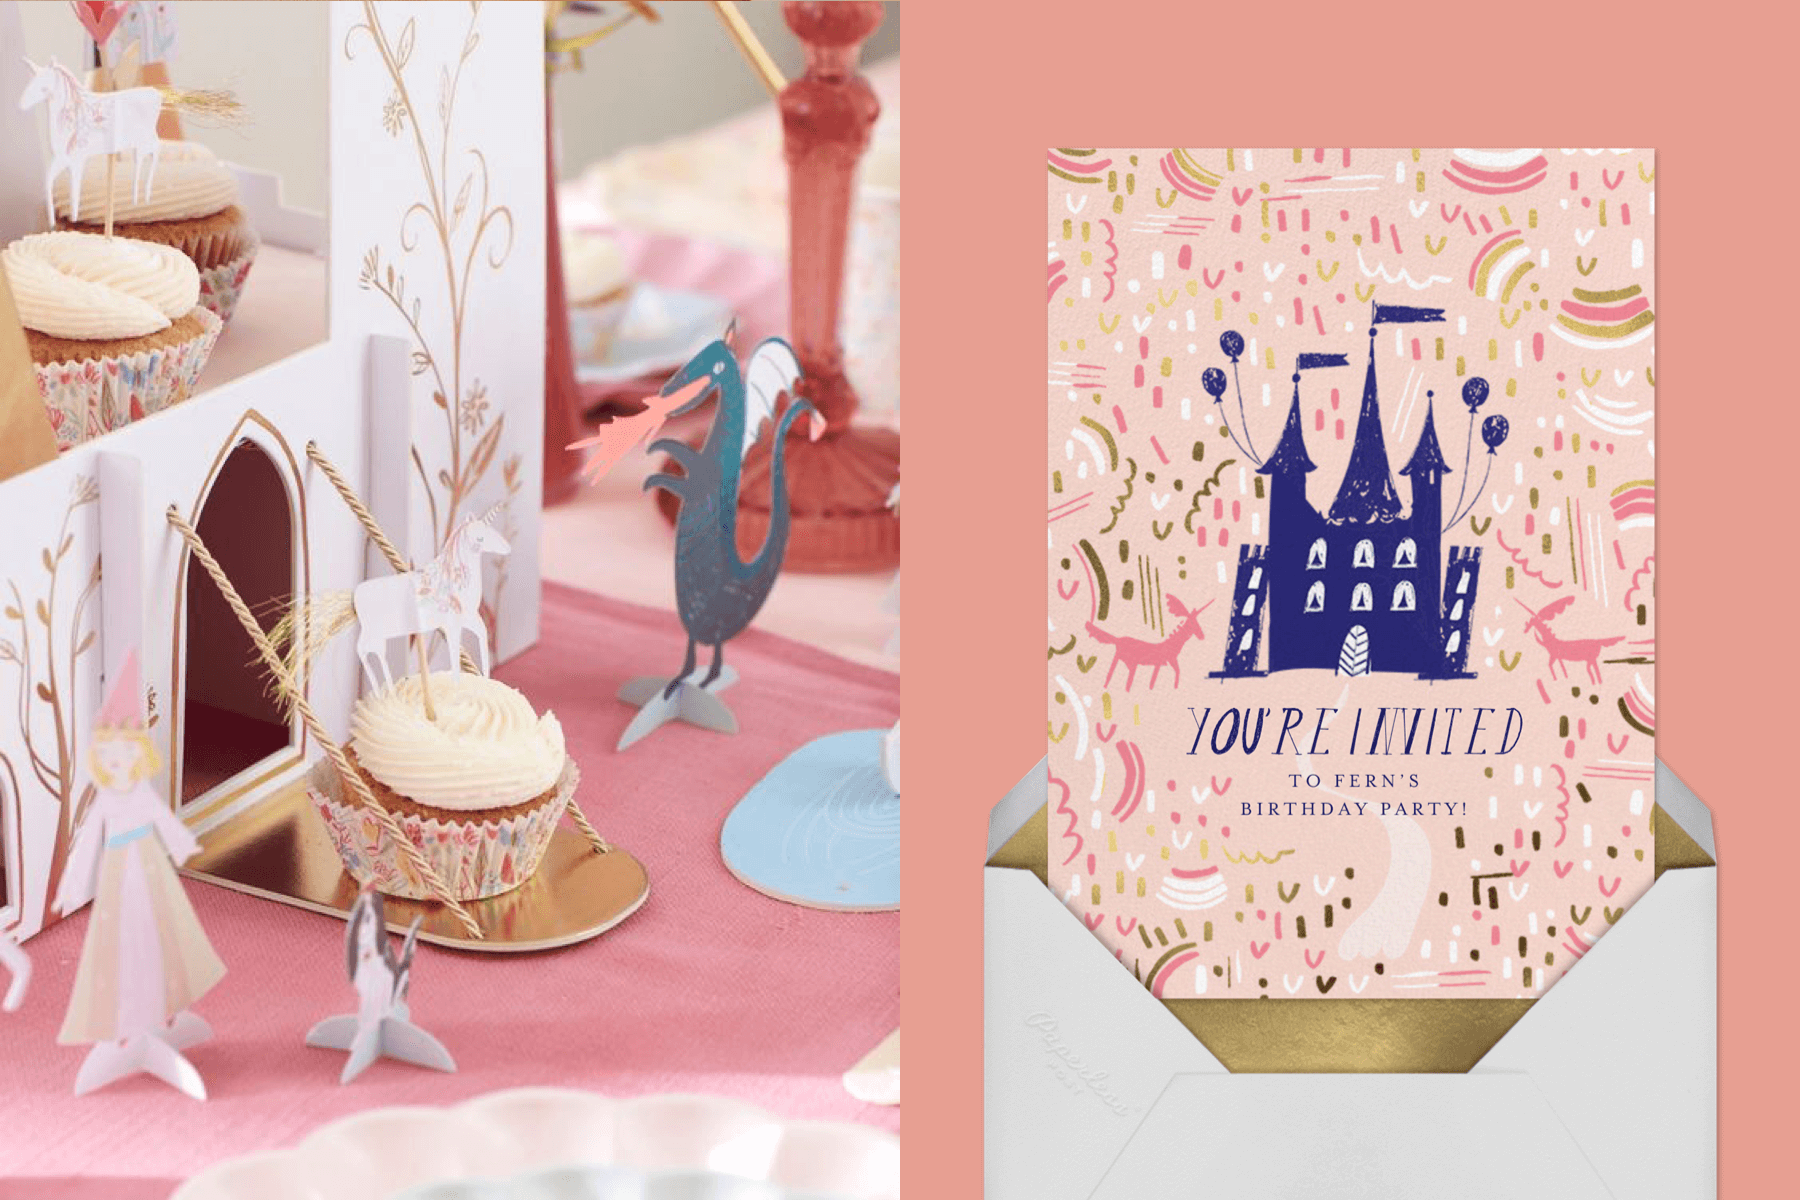 Left: A cupcake with a unicorn cake topper sits on the drawbridge of a miniature castle. Right: A pink birthday party invitation with a blue castle and balloons in the center.